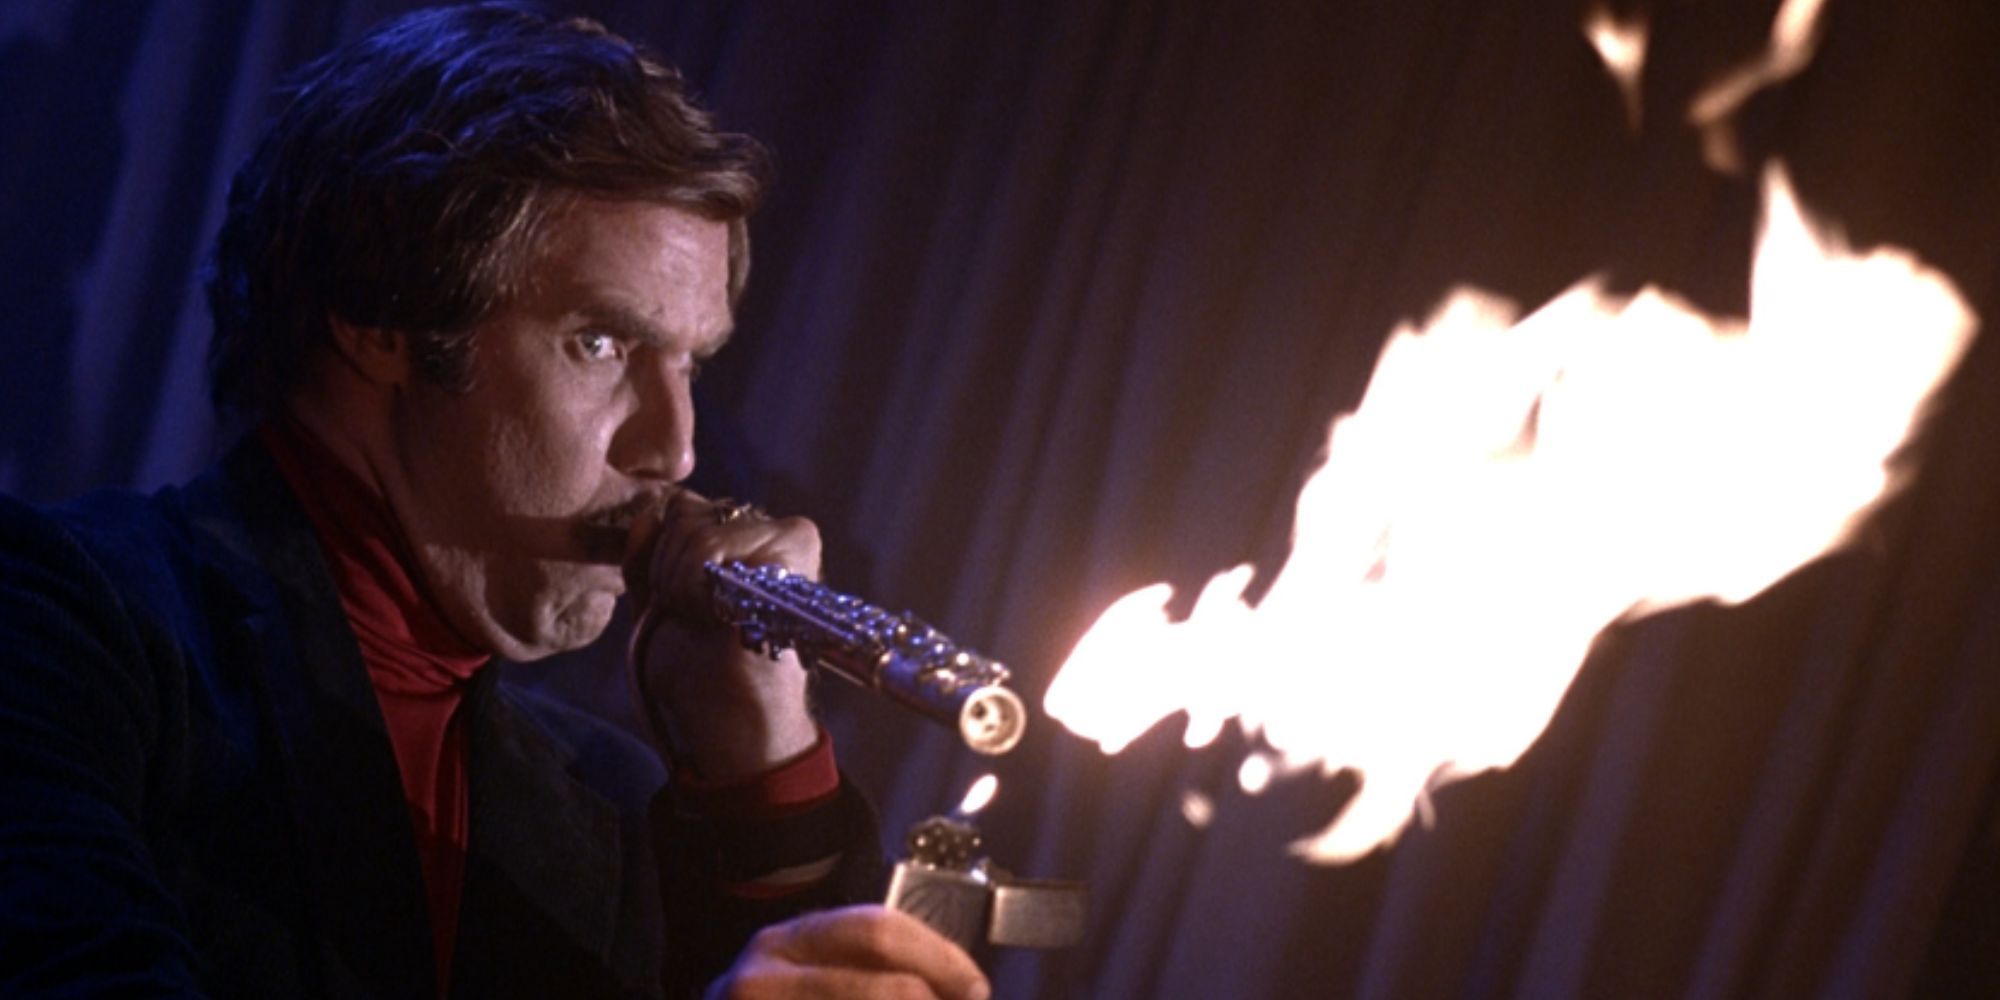 Will Ferrell as Ron Burgundy in Anchorman blowing fire from his flute